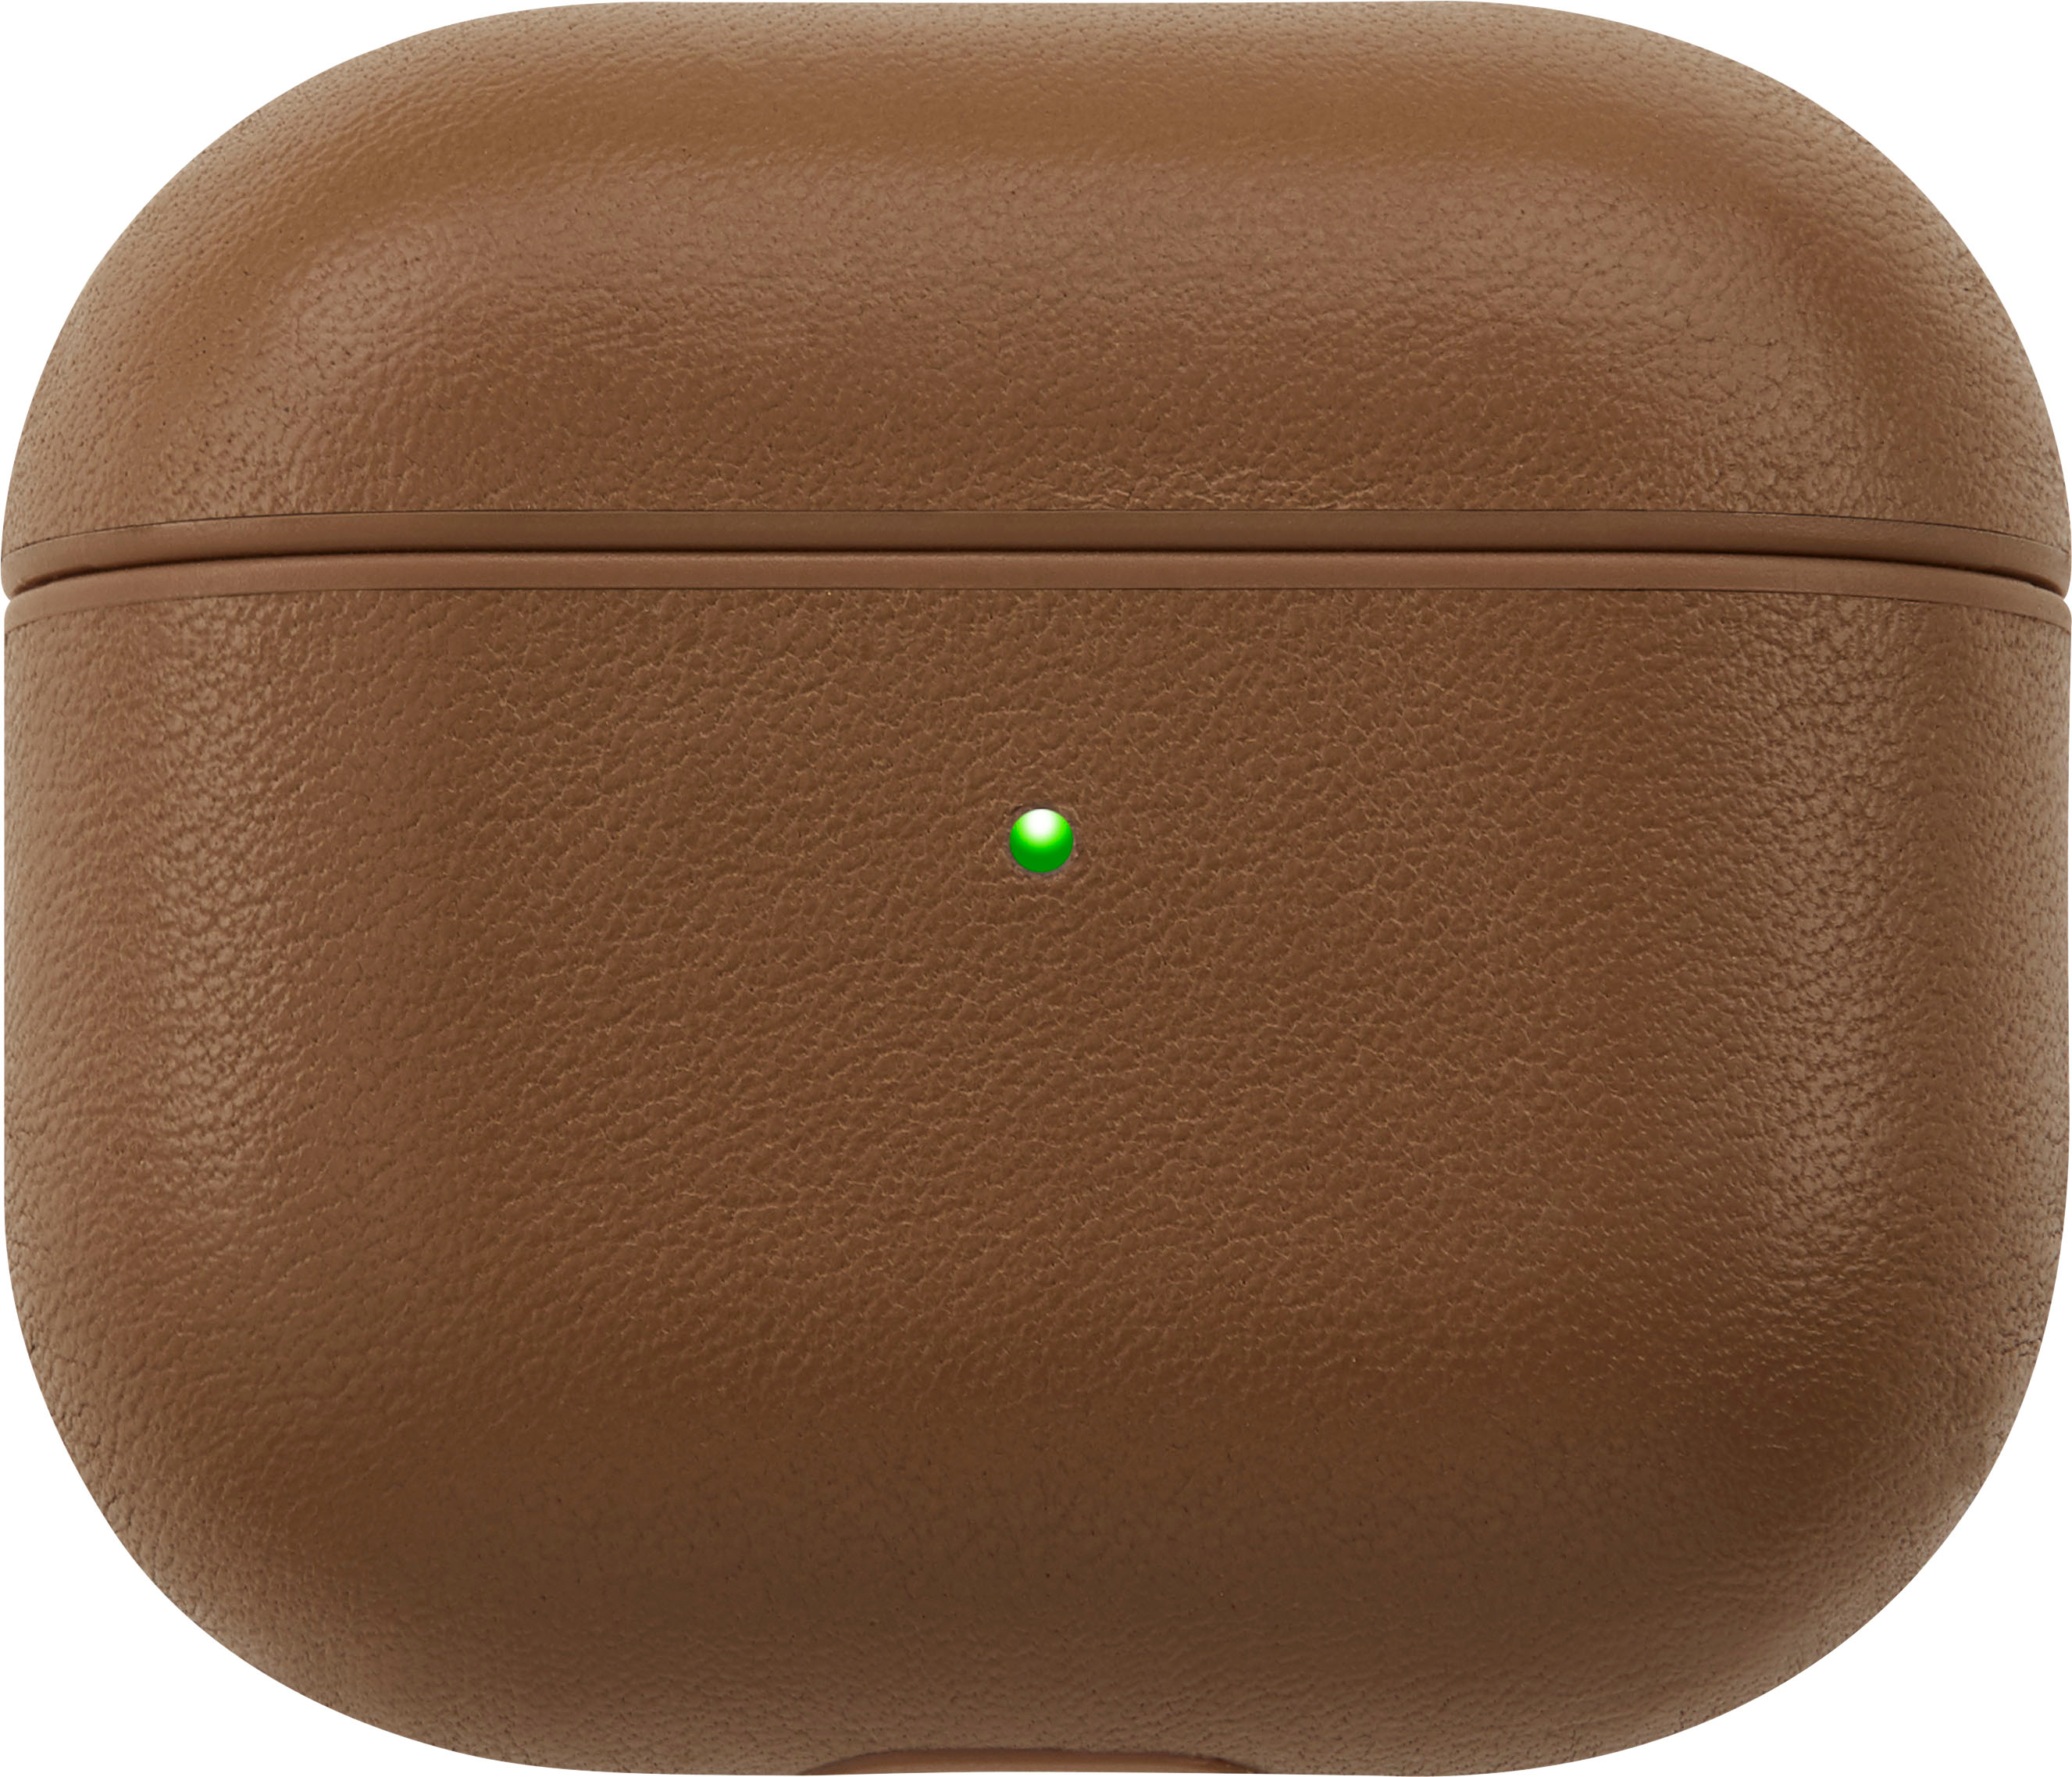 AirPods Pro (2nd Generation) Leather Case Saddle Brown